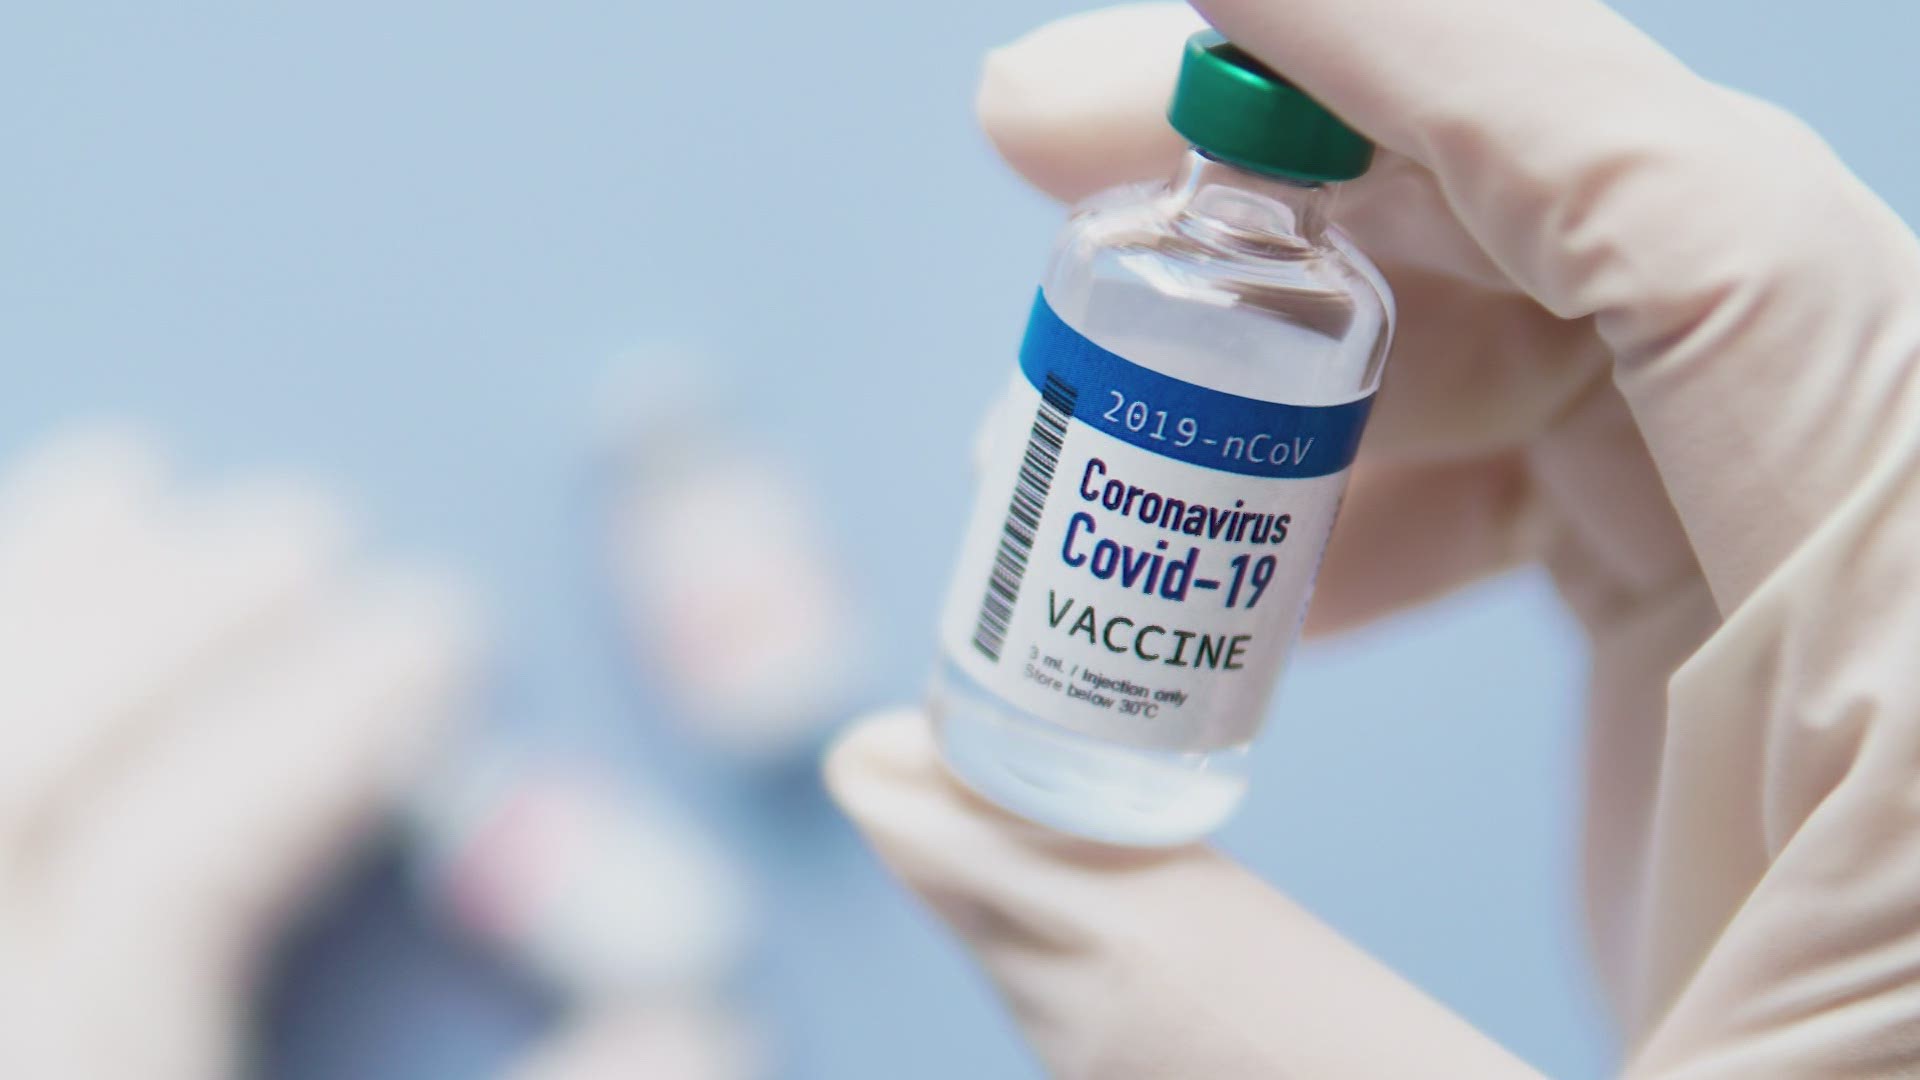 For phase 1A and 1B, only 10% of eligible Texans have received the first dose of the vaccine.